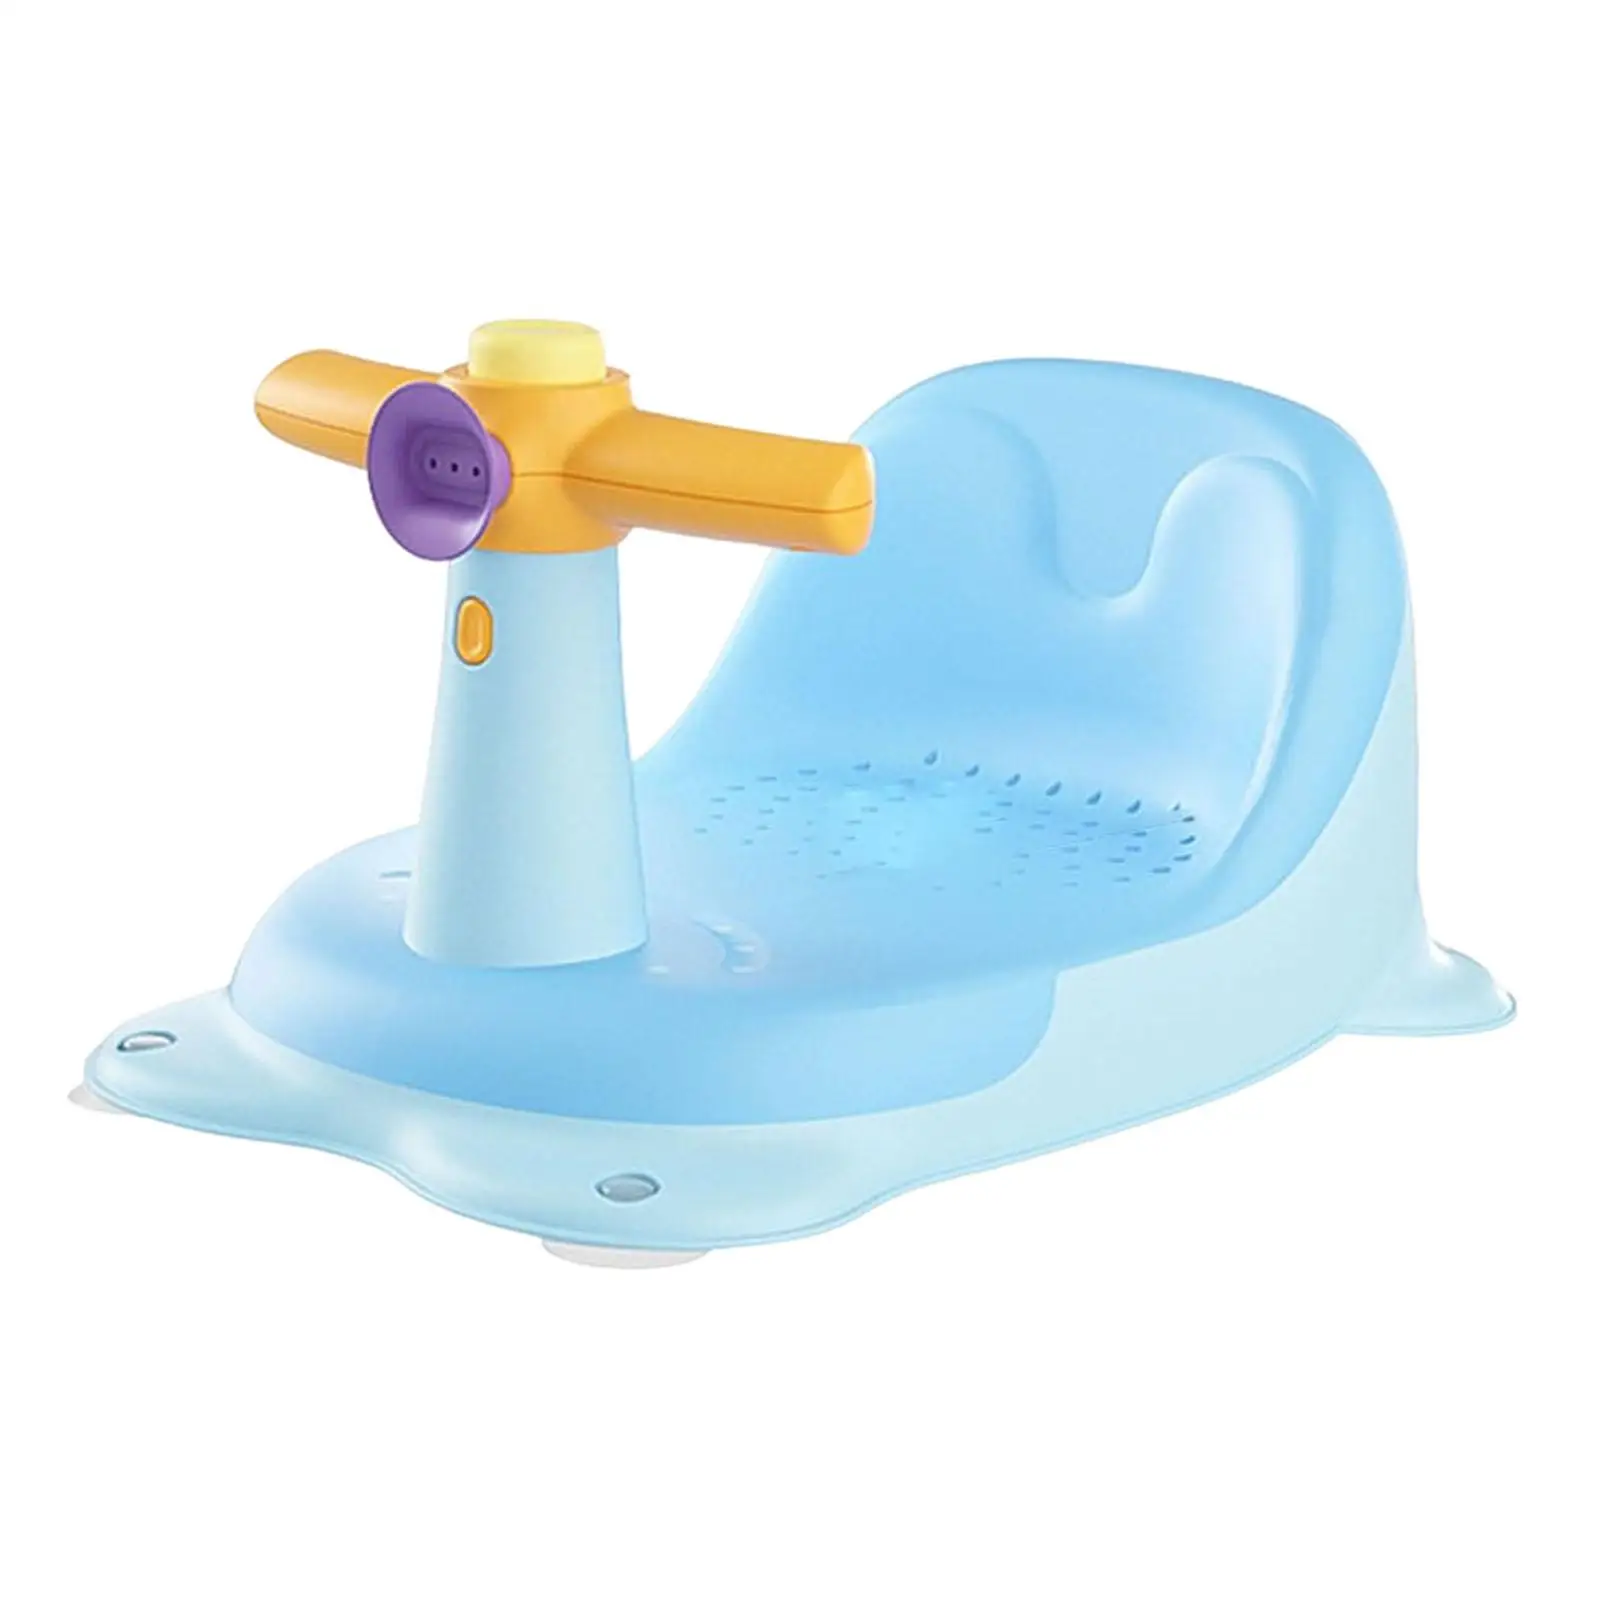 Baby Bath Seat Bath Seat Support Seat Pad Bath Chair Comfortable for Baby Girls